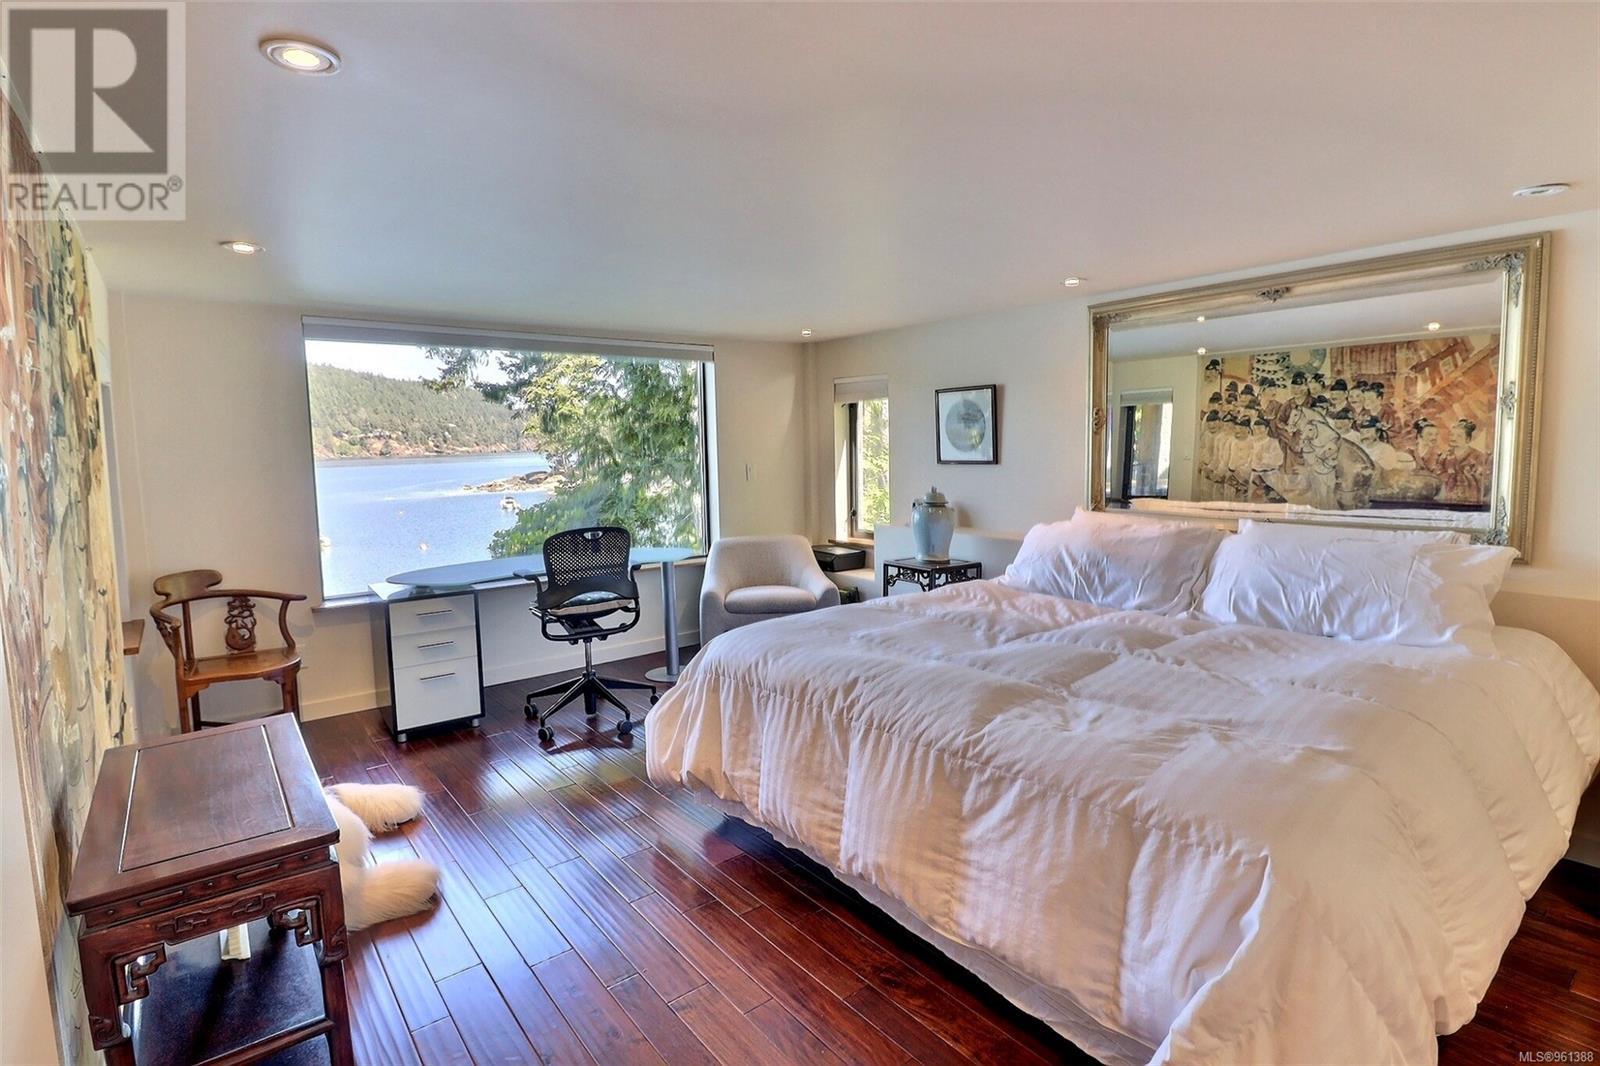  7909 Bedwell Drive, Pender Island